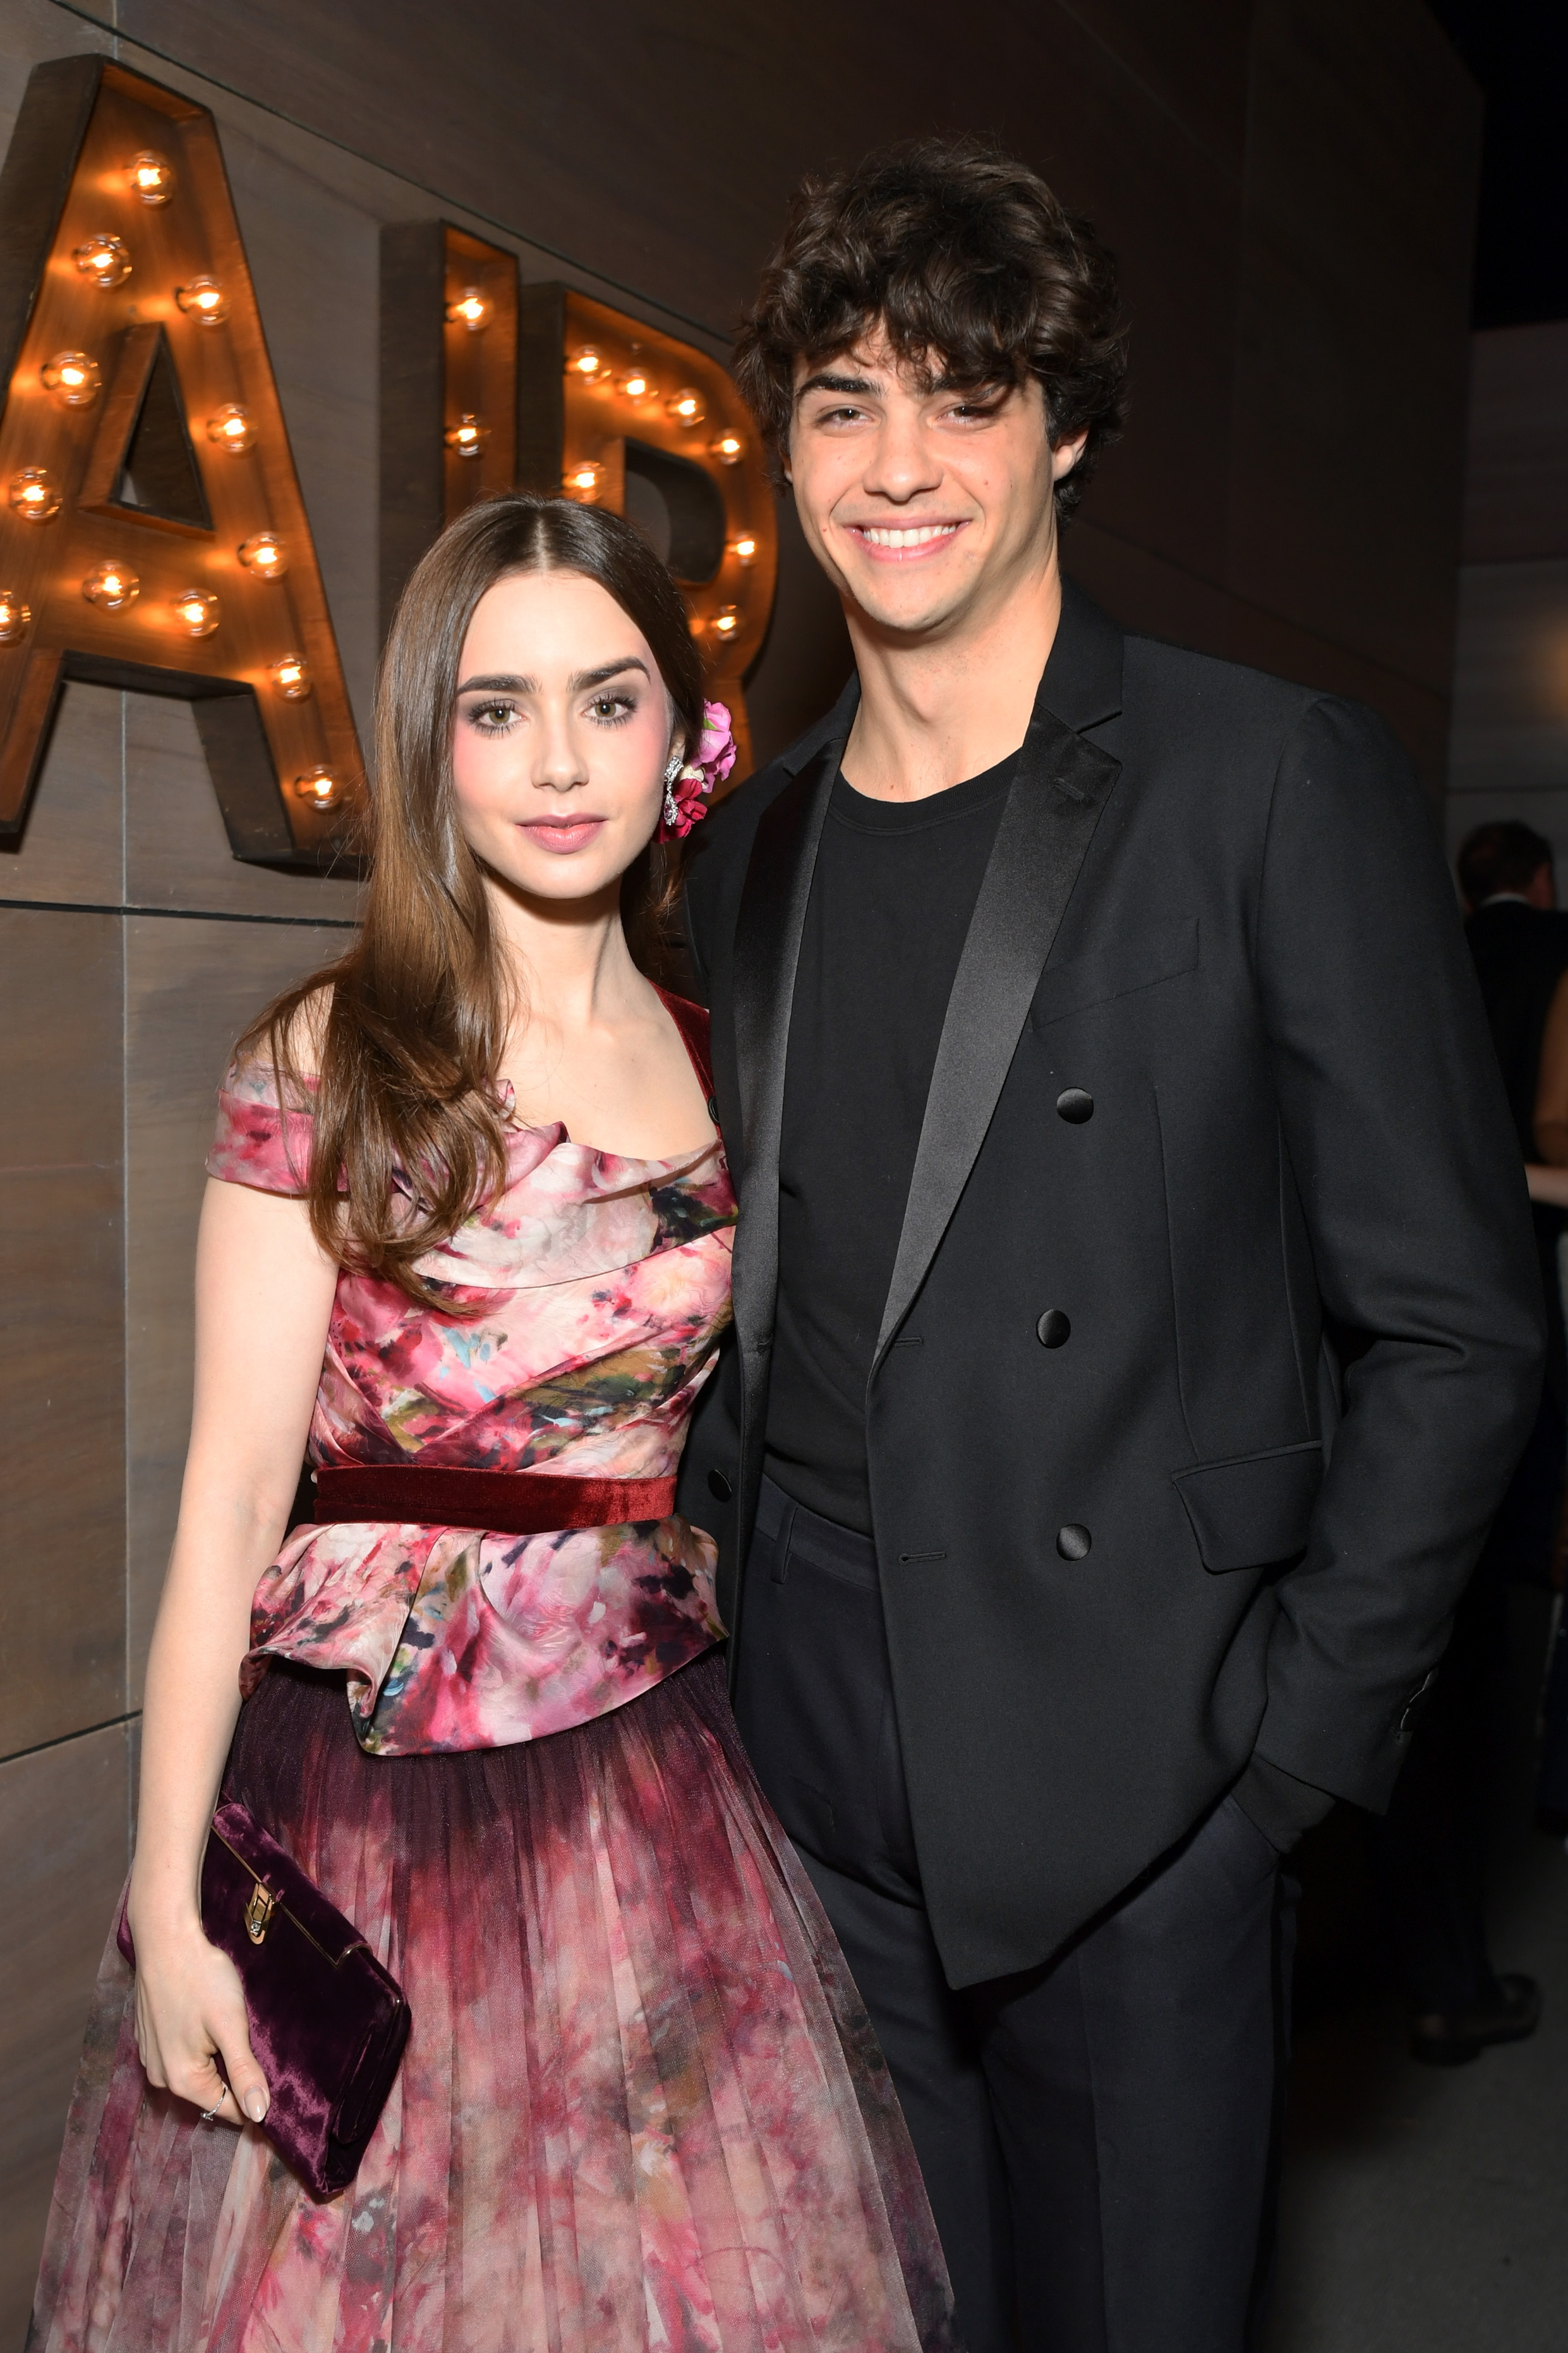 Lily Collins and Noah Centineo attend the 2019 Vanity Fair Oscar Party hosted by Radhika Jones at Wallis Annenberg Center for the Performing Arts on February 24, 2019, in Beverly Hills, California. | Source: Getty Images